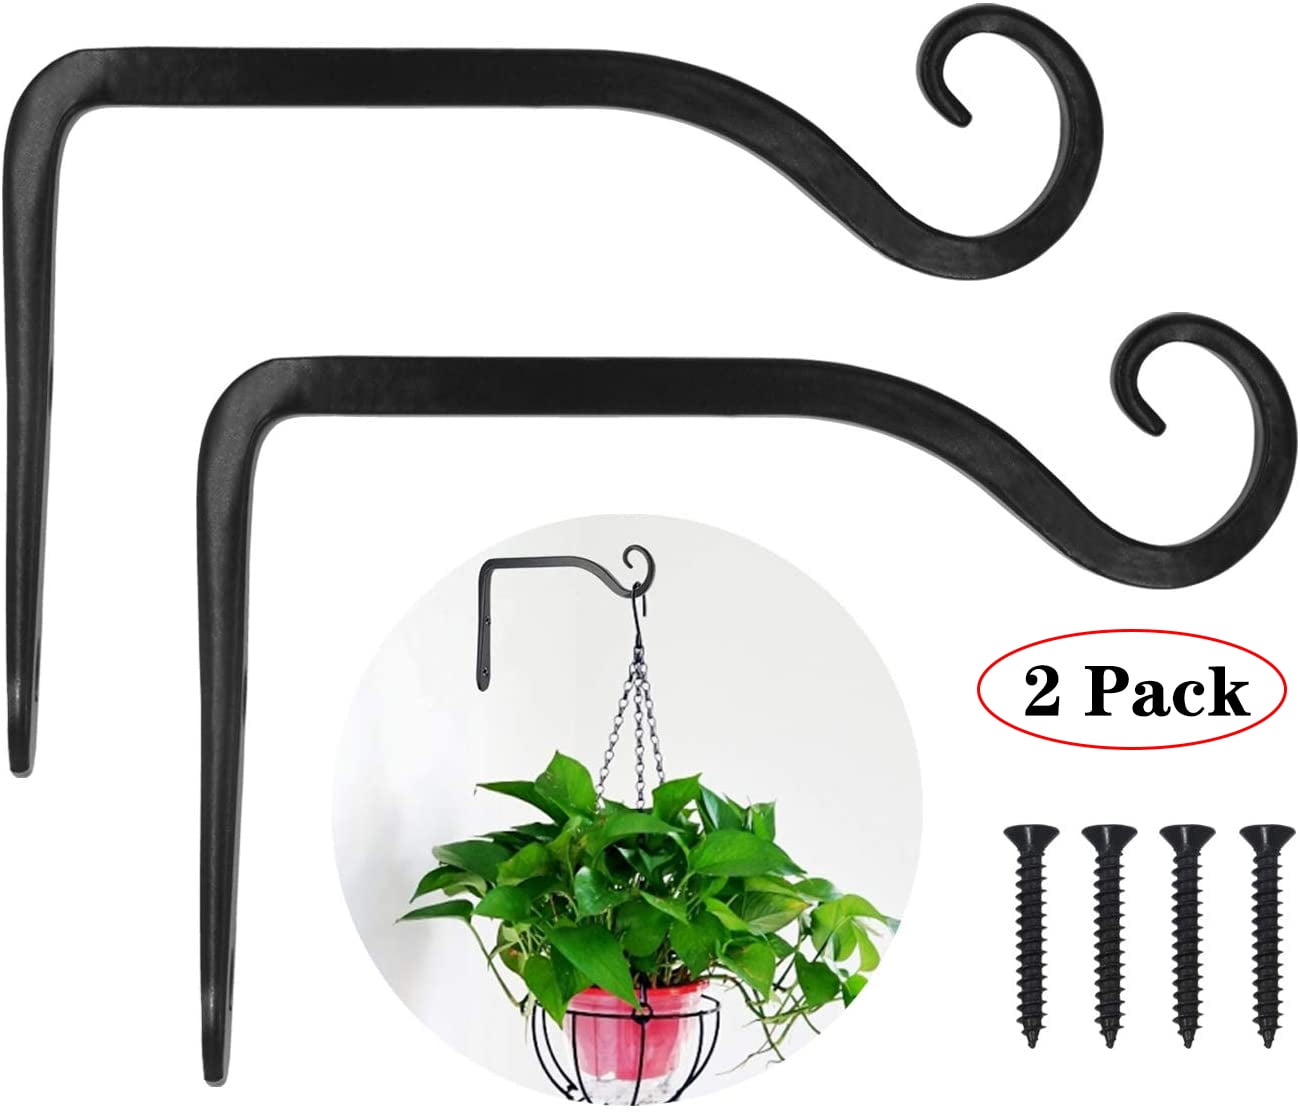 8 Pack Extra Large 10 inch S Hooks for Hanging,S Shaped Hook Heavy